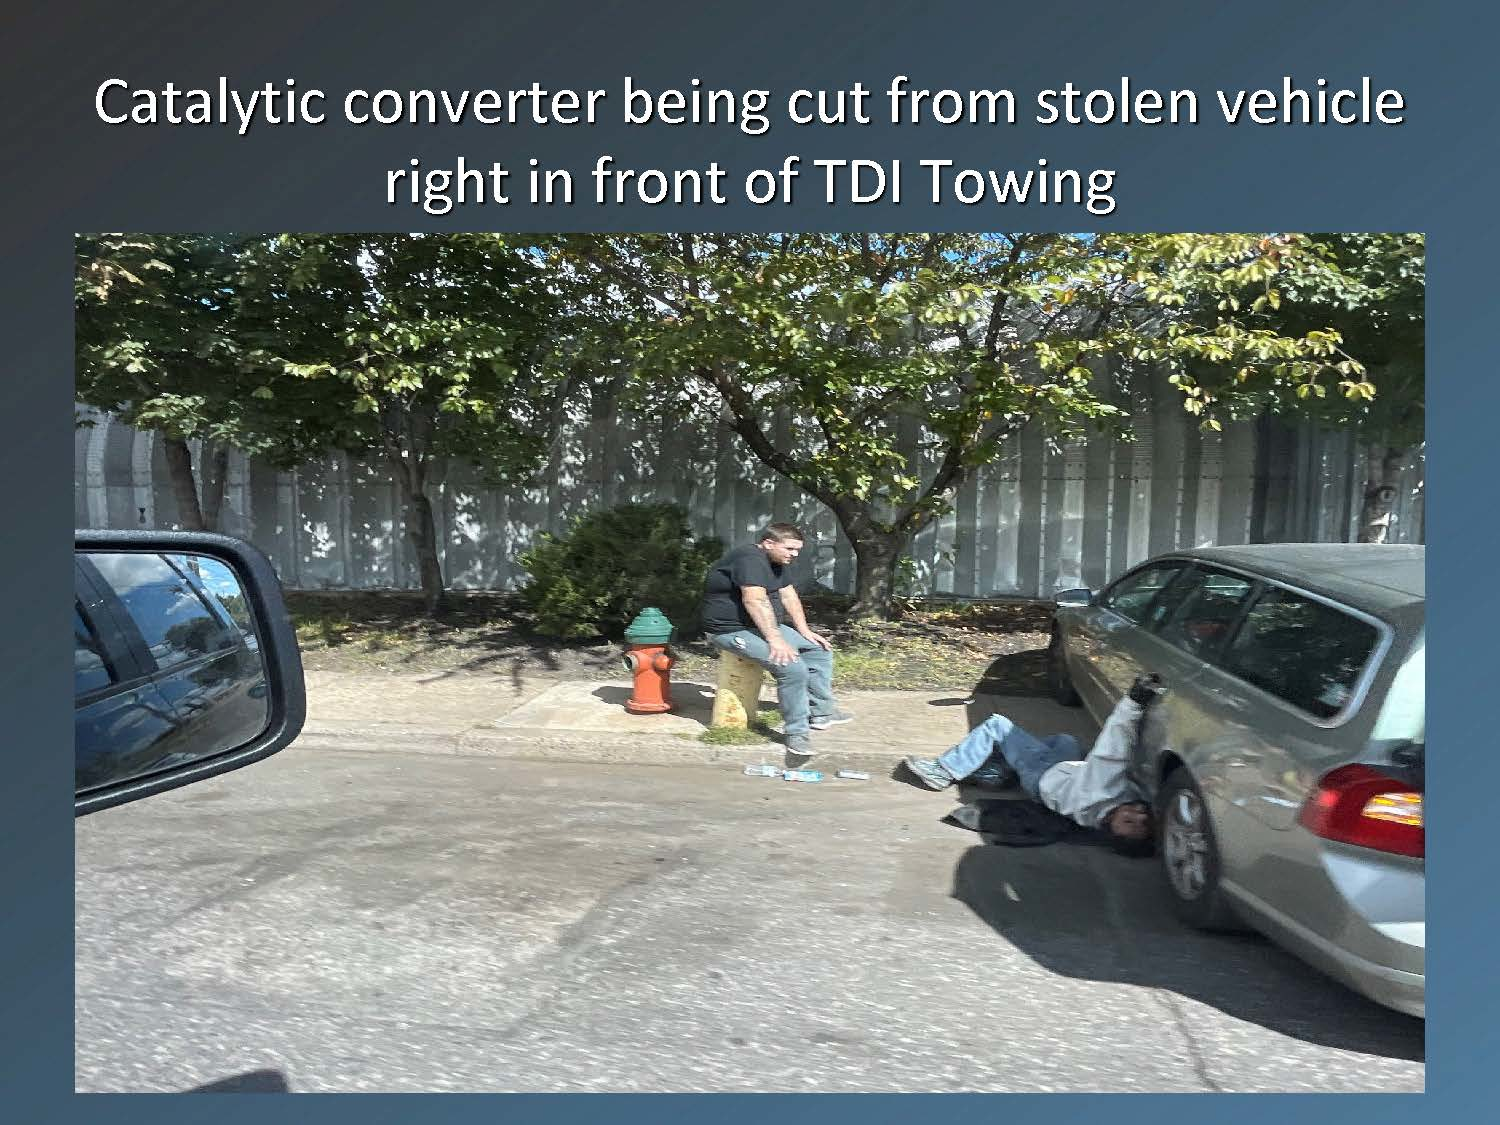 TDI Towing's catalytic converter theft ring busted